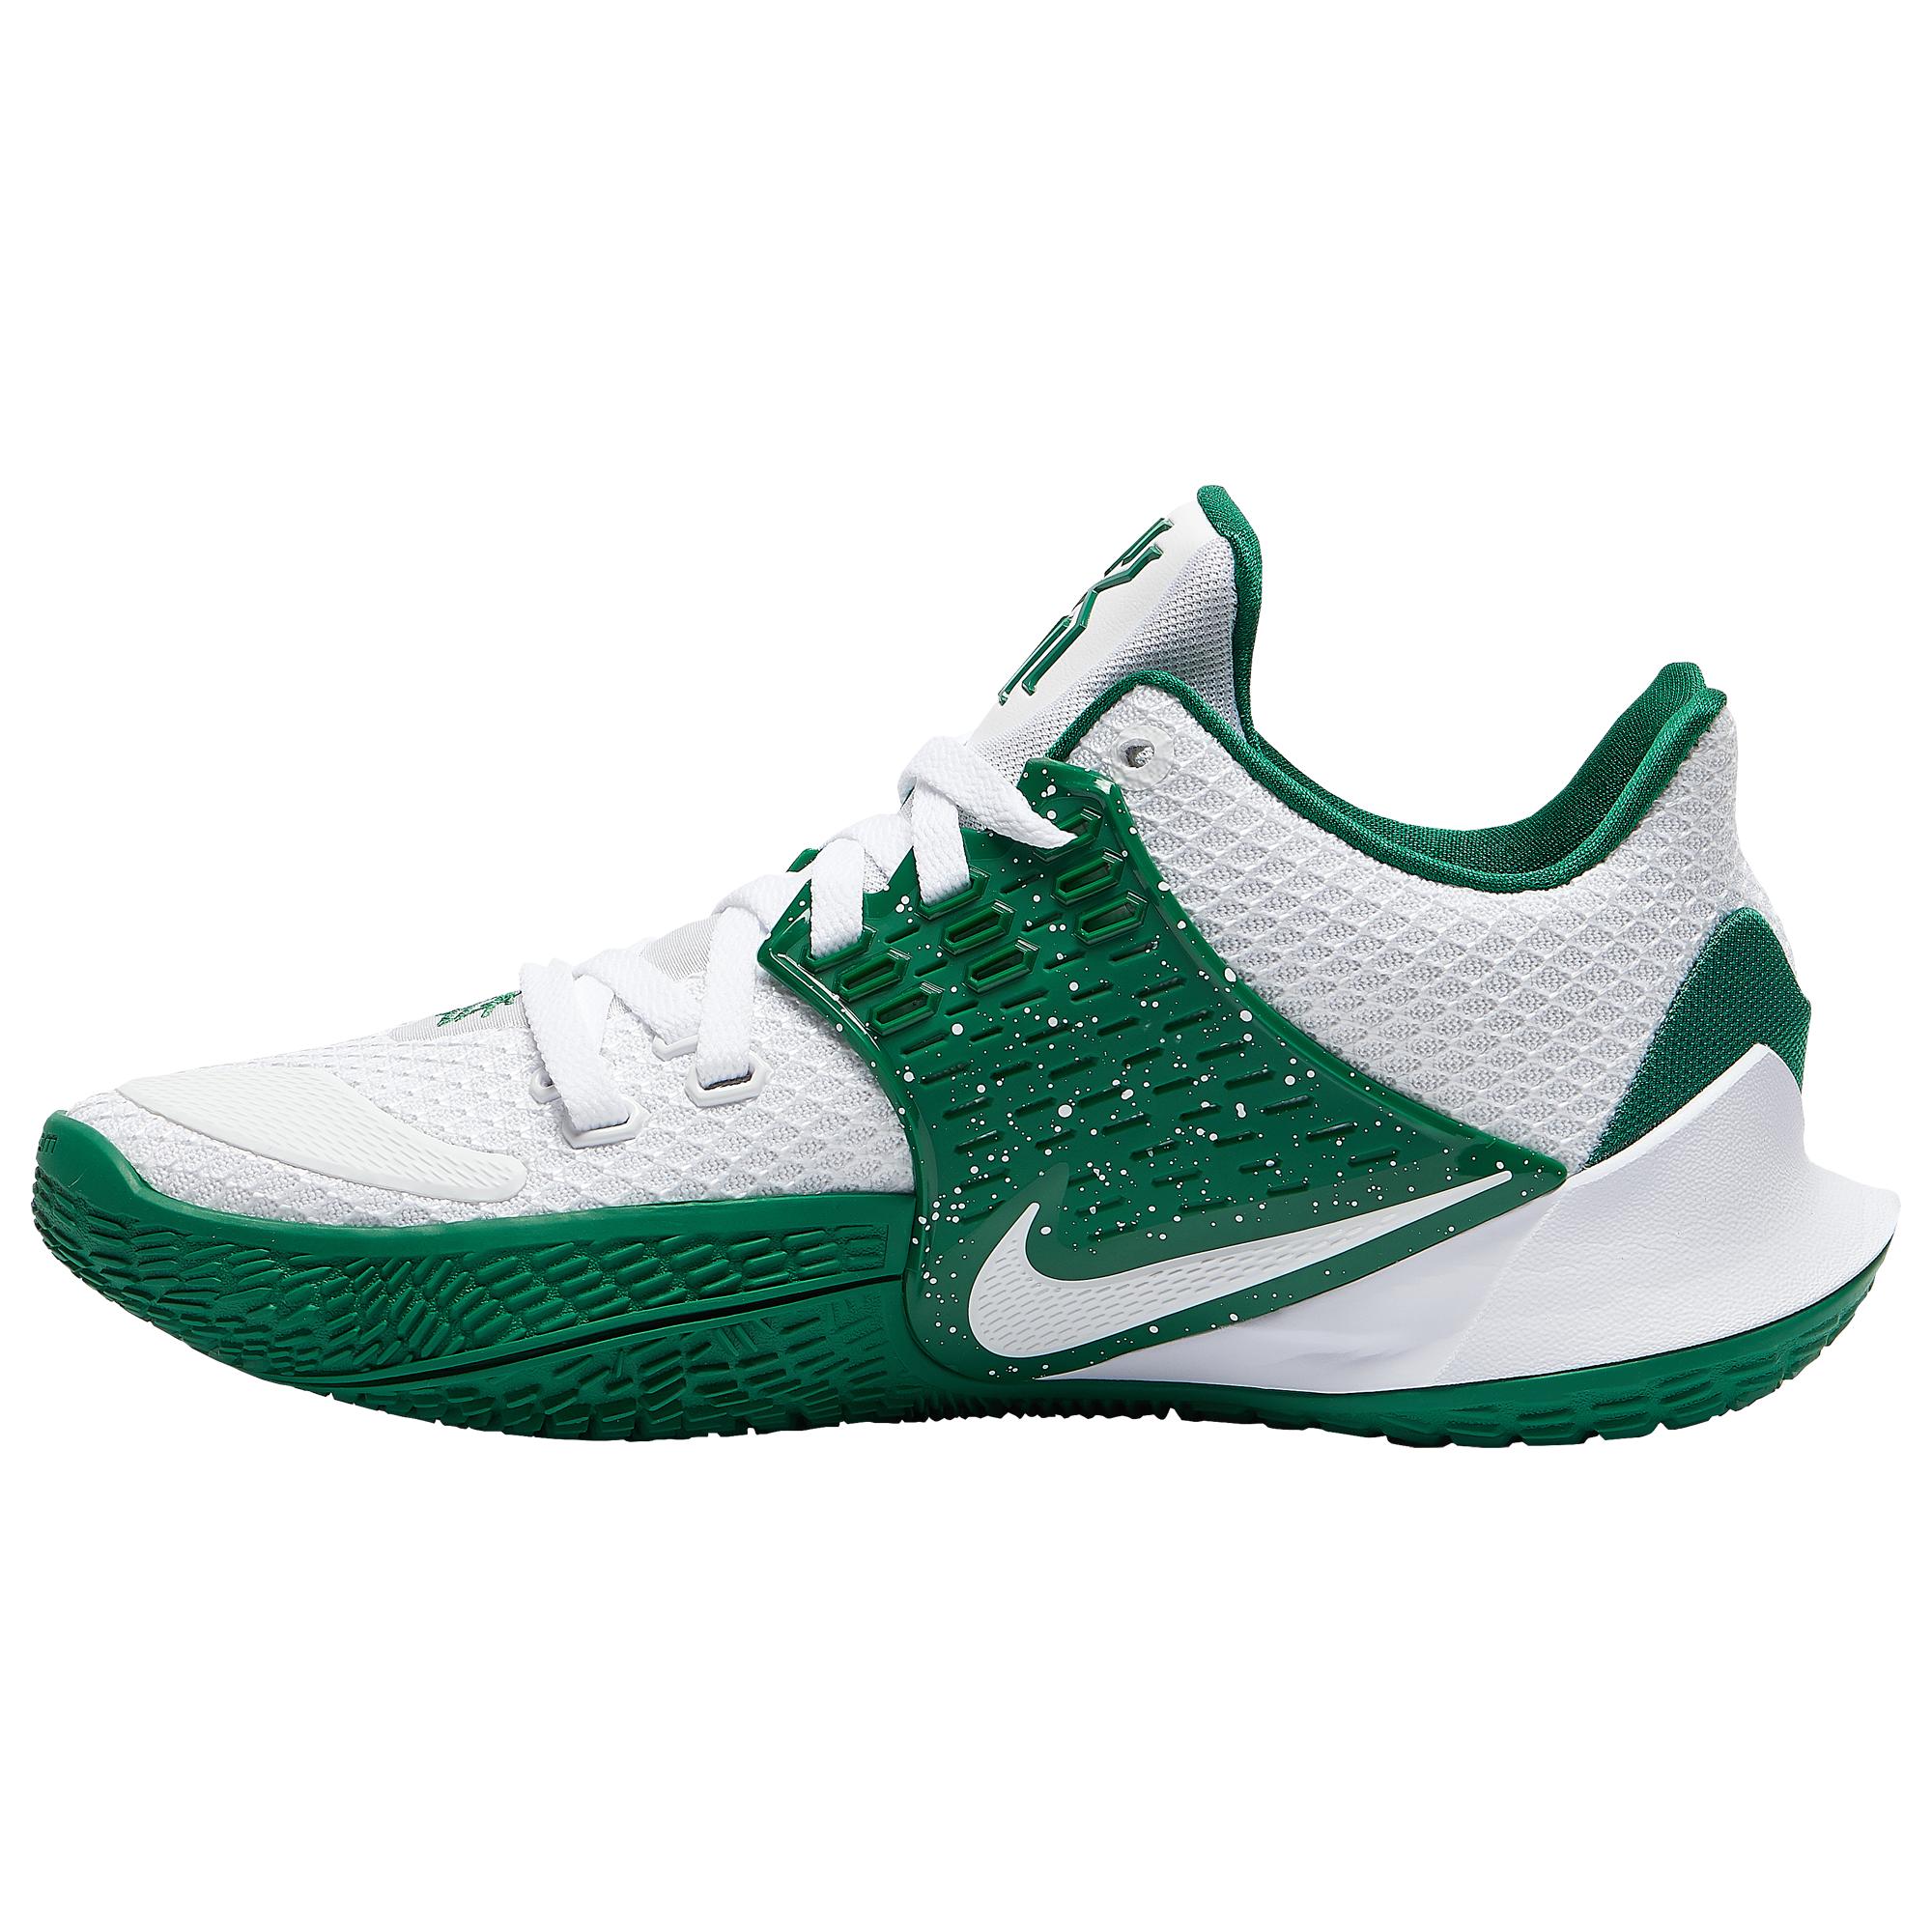 kyrie irving shoes 2 green